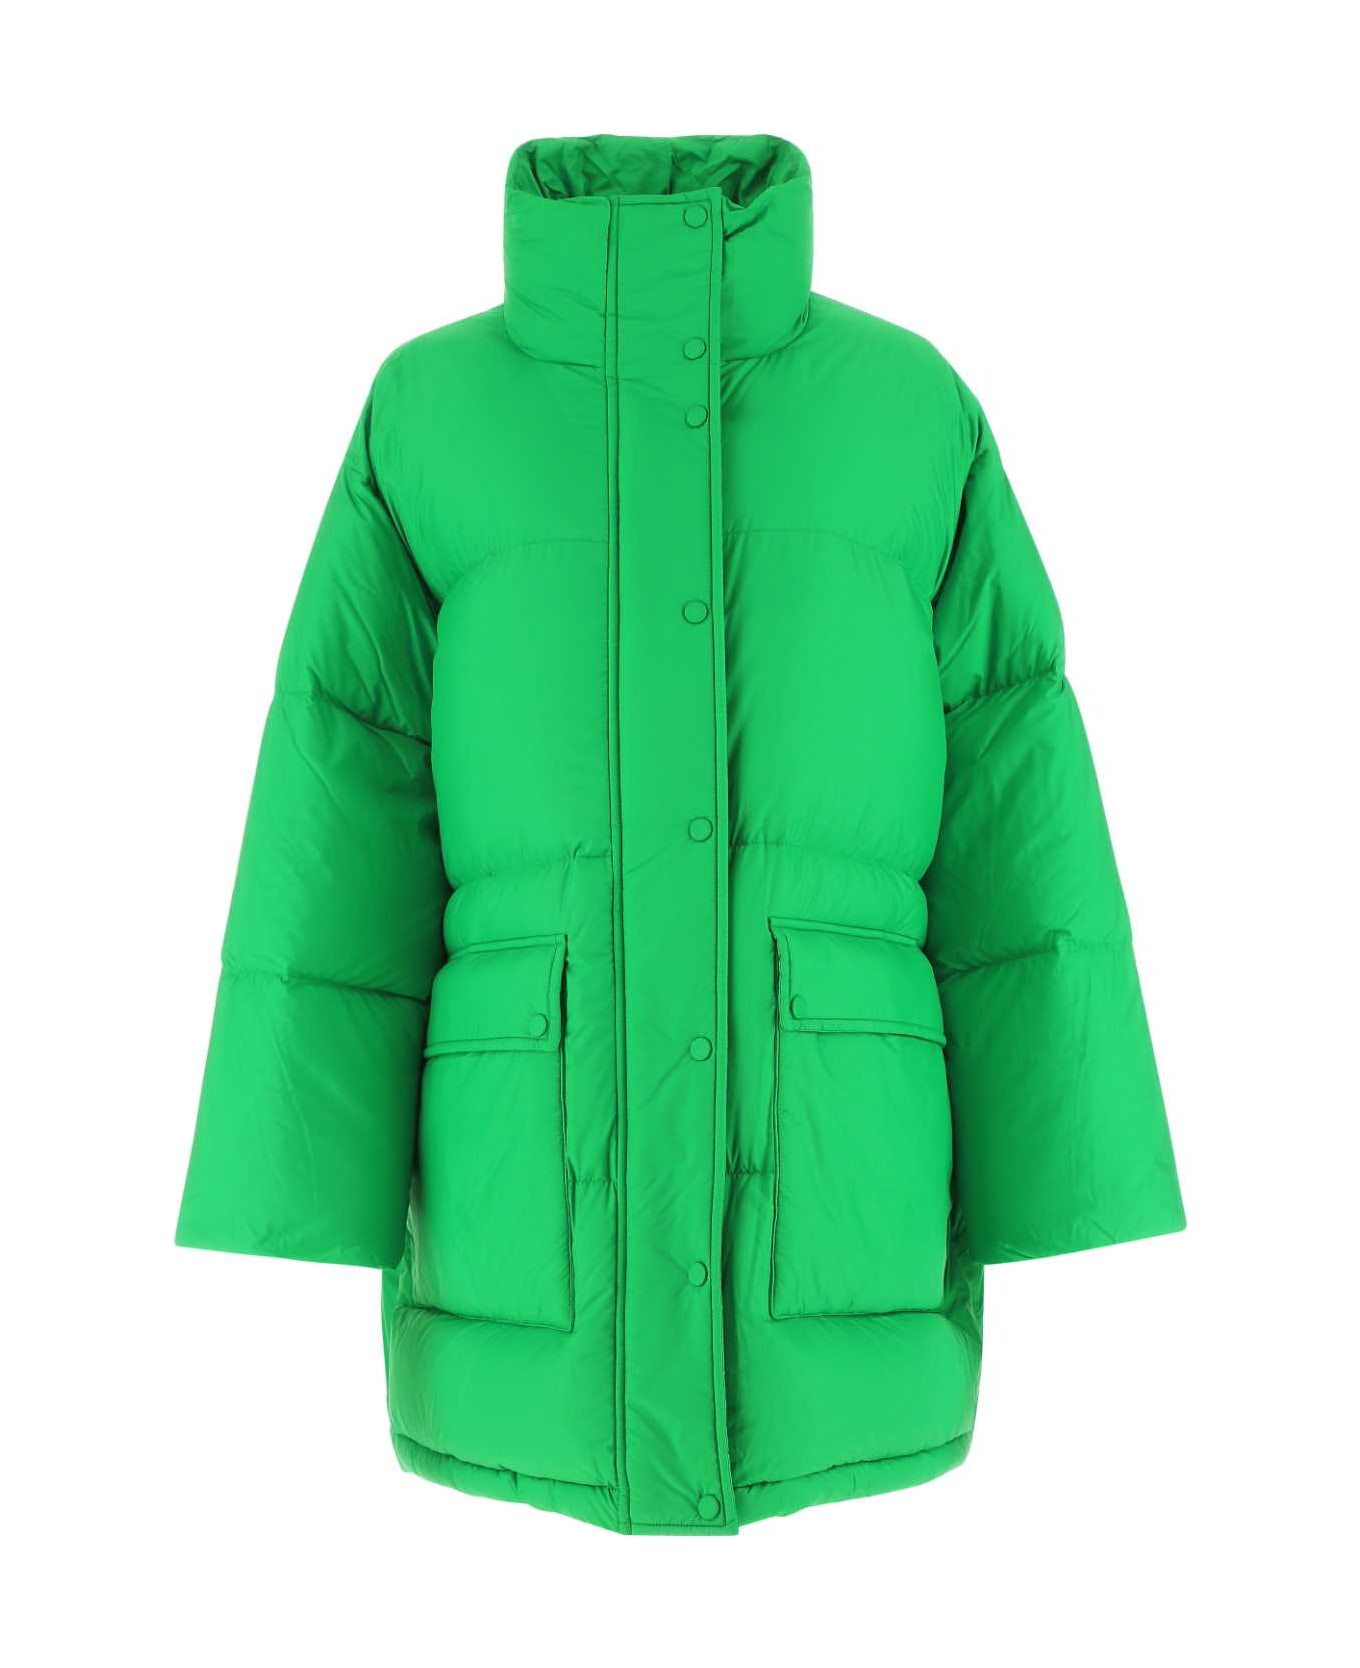 STAND STUDIO Grass Green Polyester Oversize Edna Down Jacket - 56000 コート